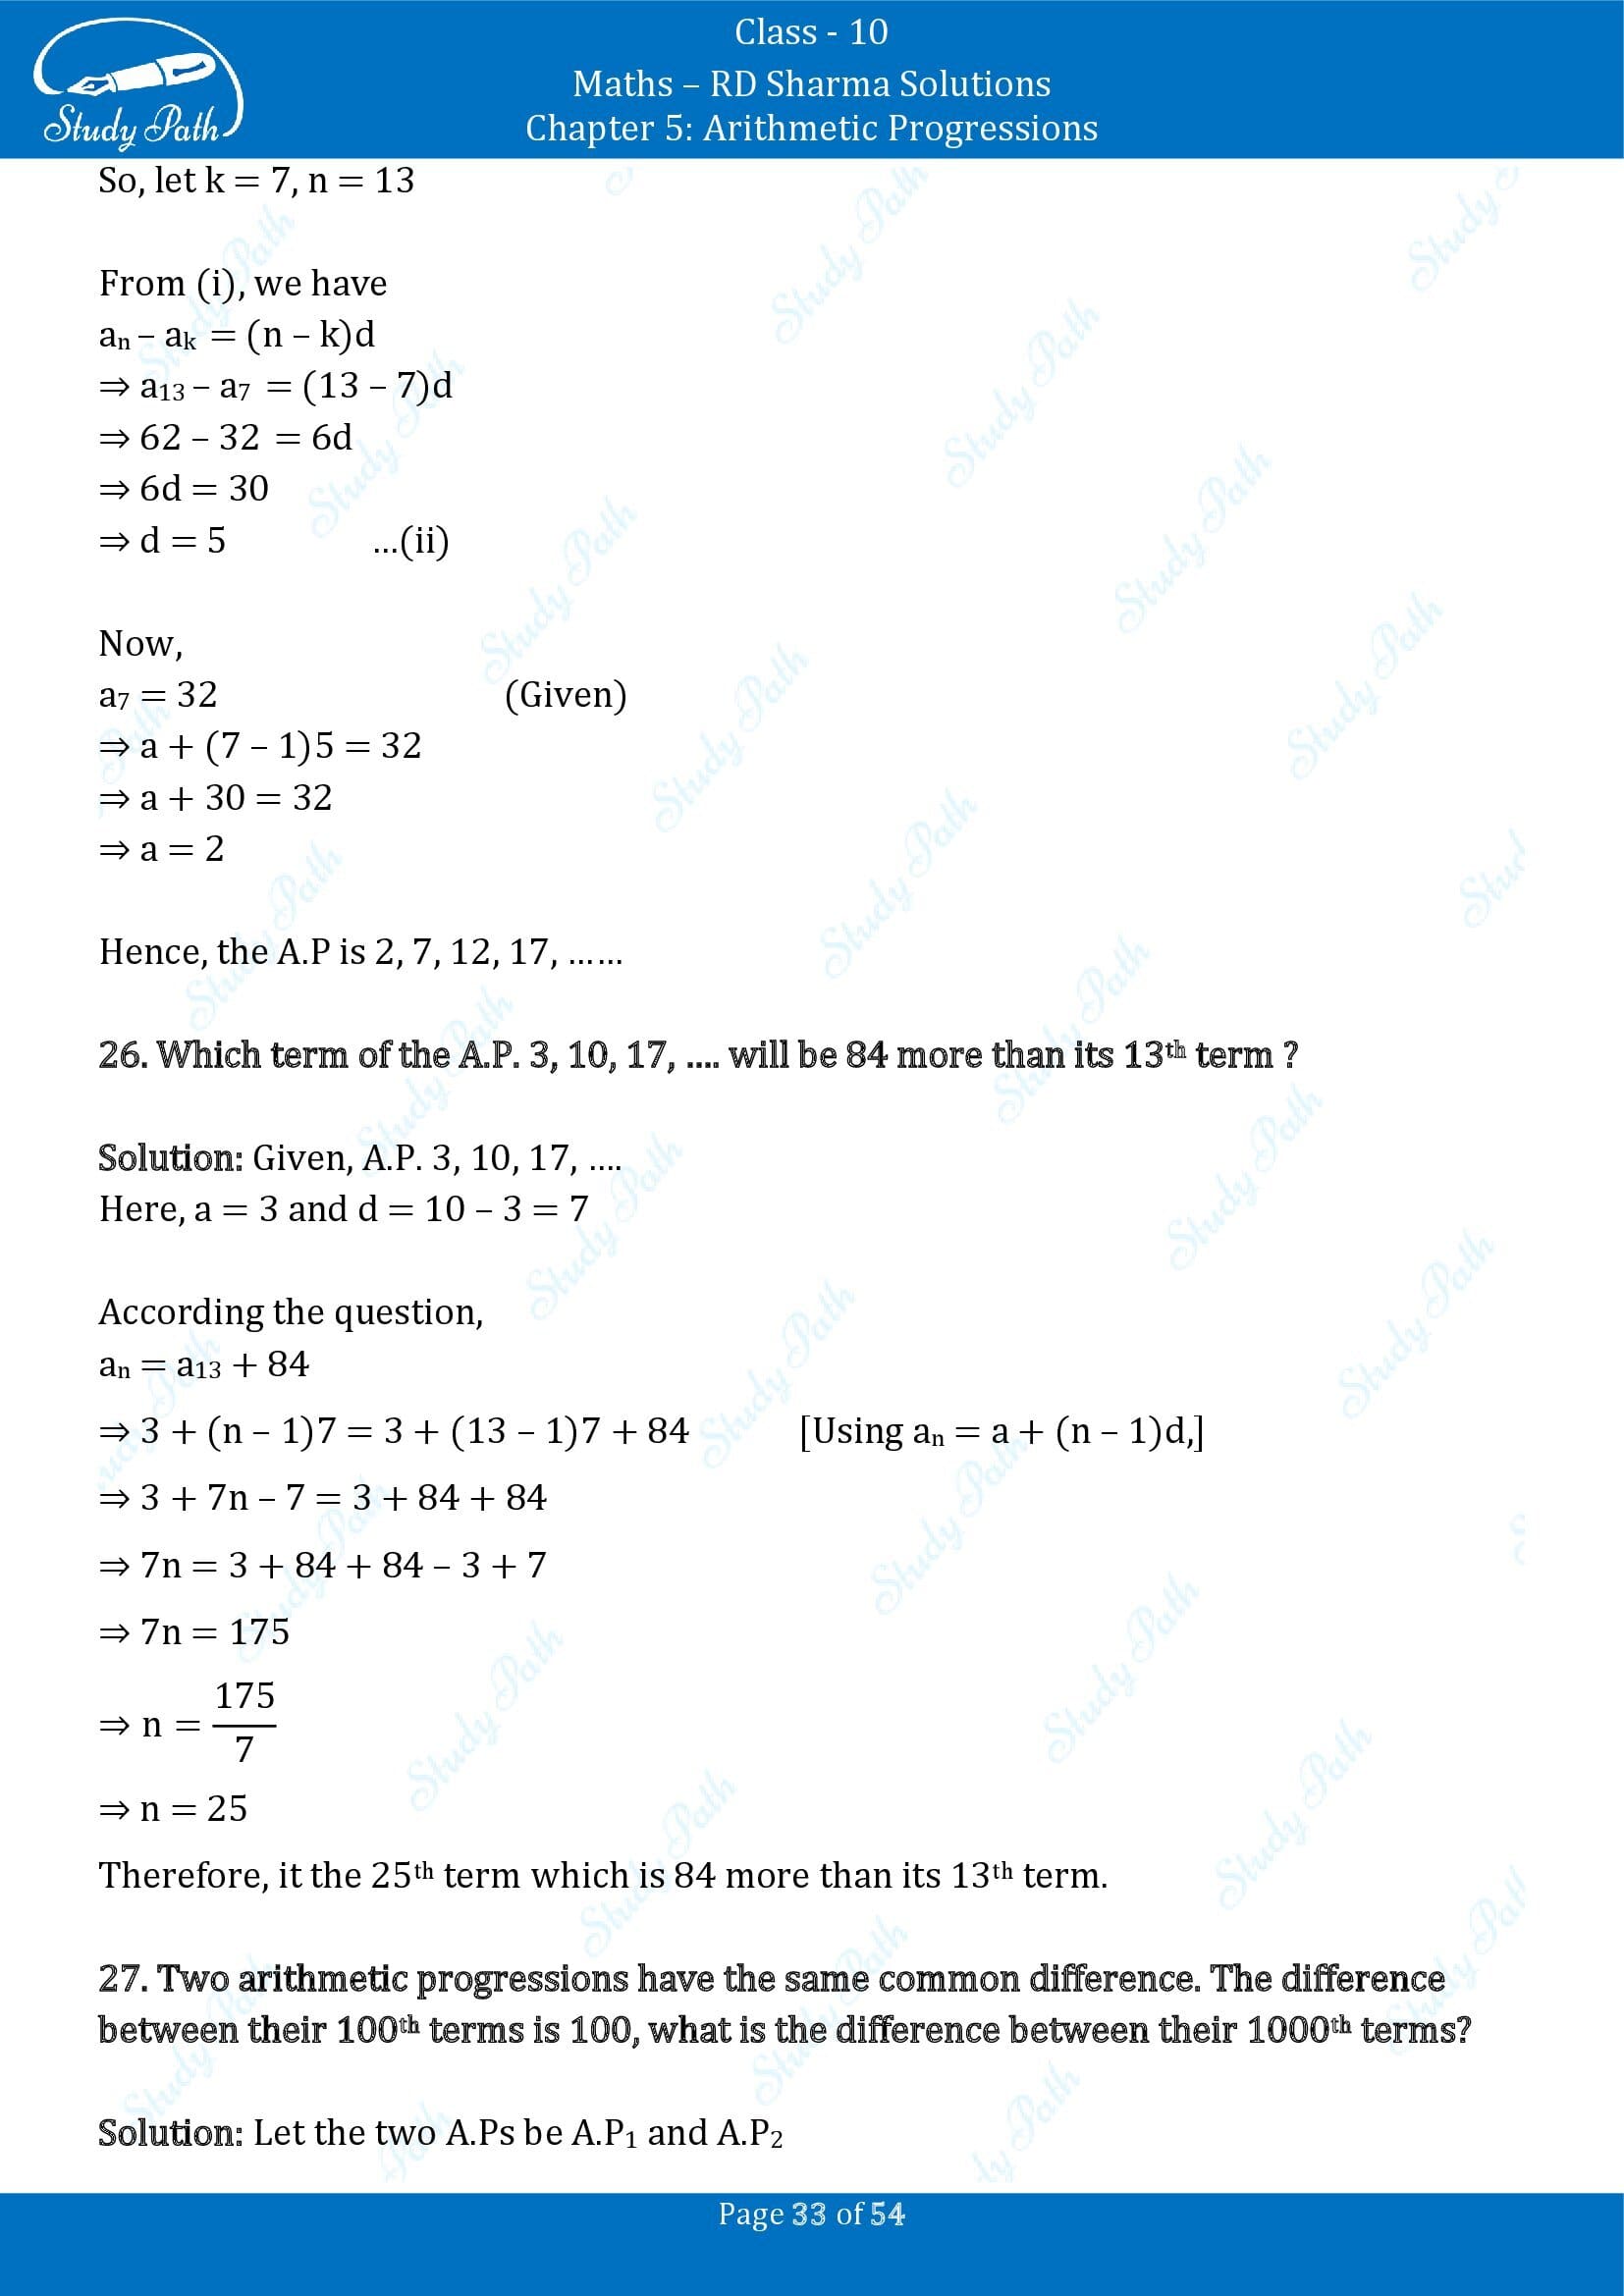 RD Sharma Solutions Class 10 Chapter 5 Arithmetic Progressions Exercise 5.4 00033